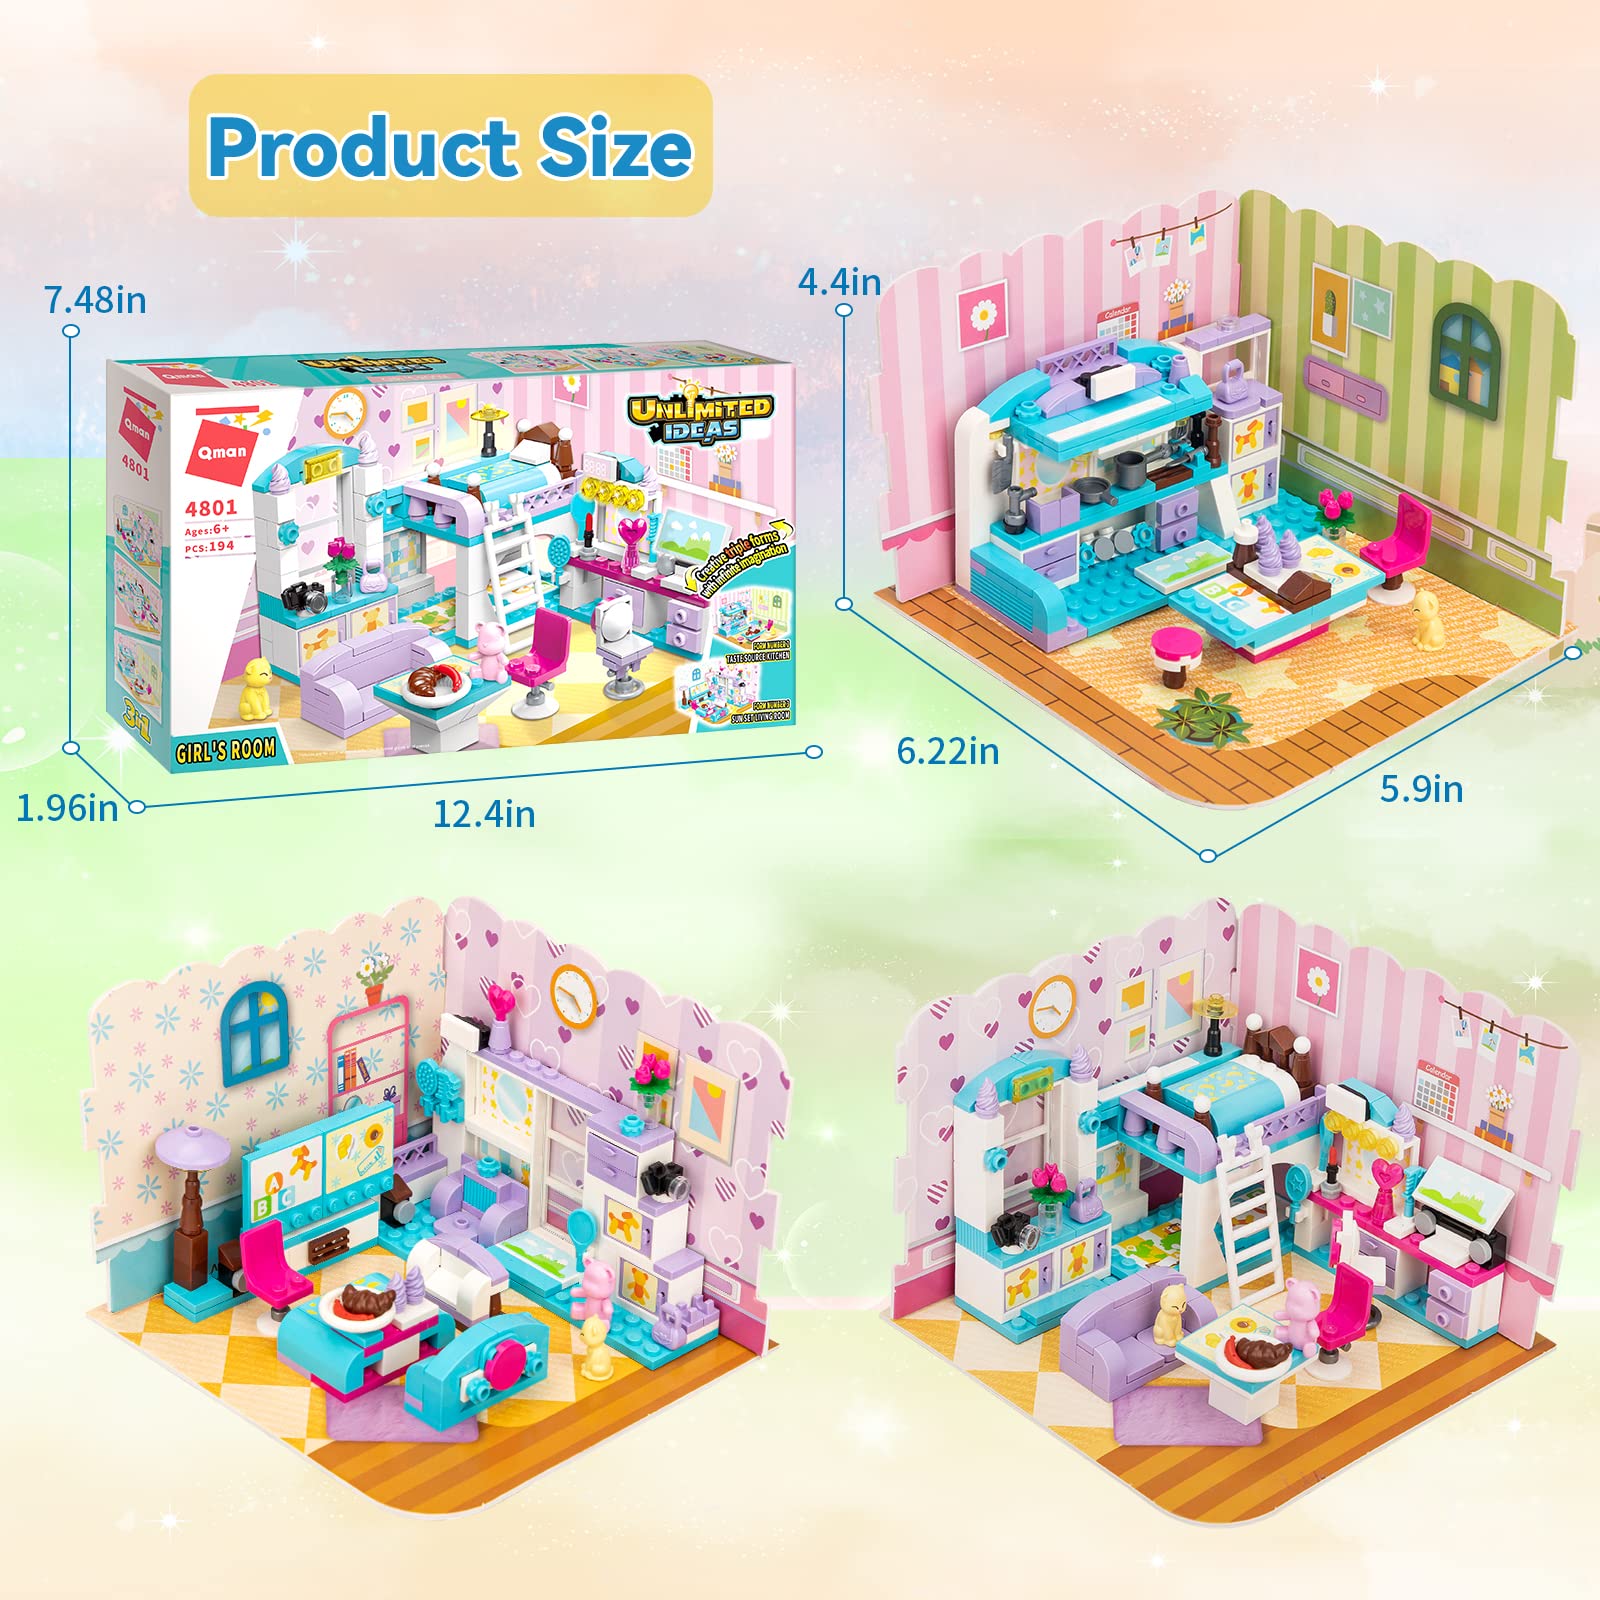 Mov stone 3 in 1 Dream Home Friends Building Sets for Girls 6-12,Creative 194 Pieces Friends Play House Educational Bricks DIY Toys Christmas Birthday Gift for Kids Age 6 7 8 10 11 12